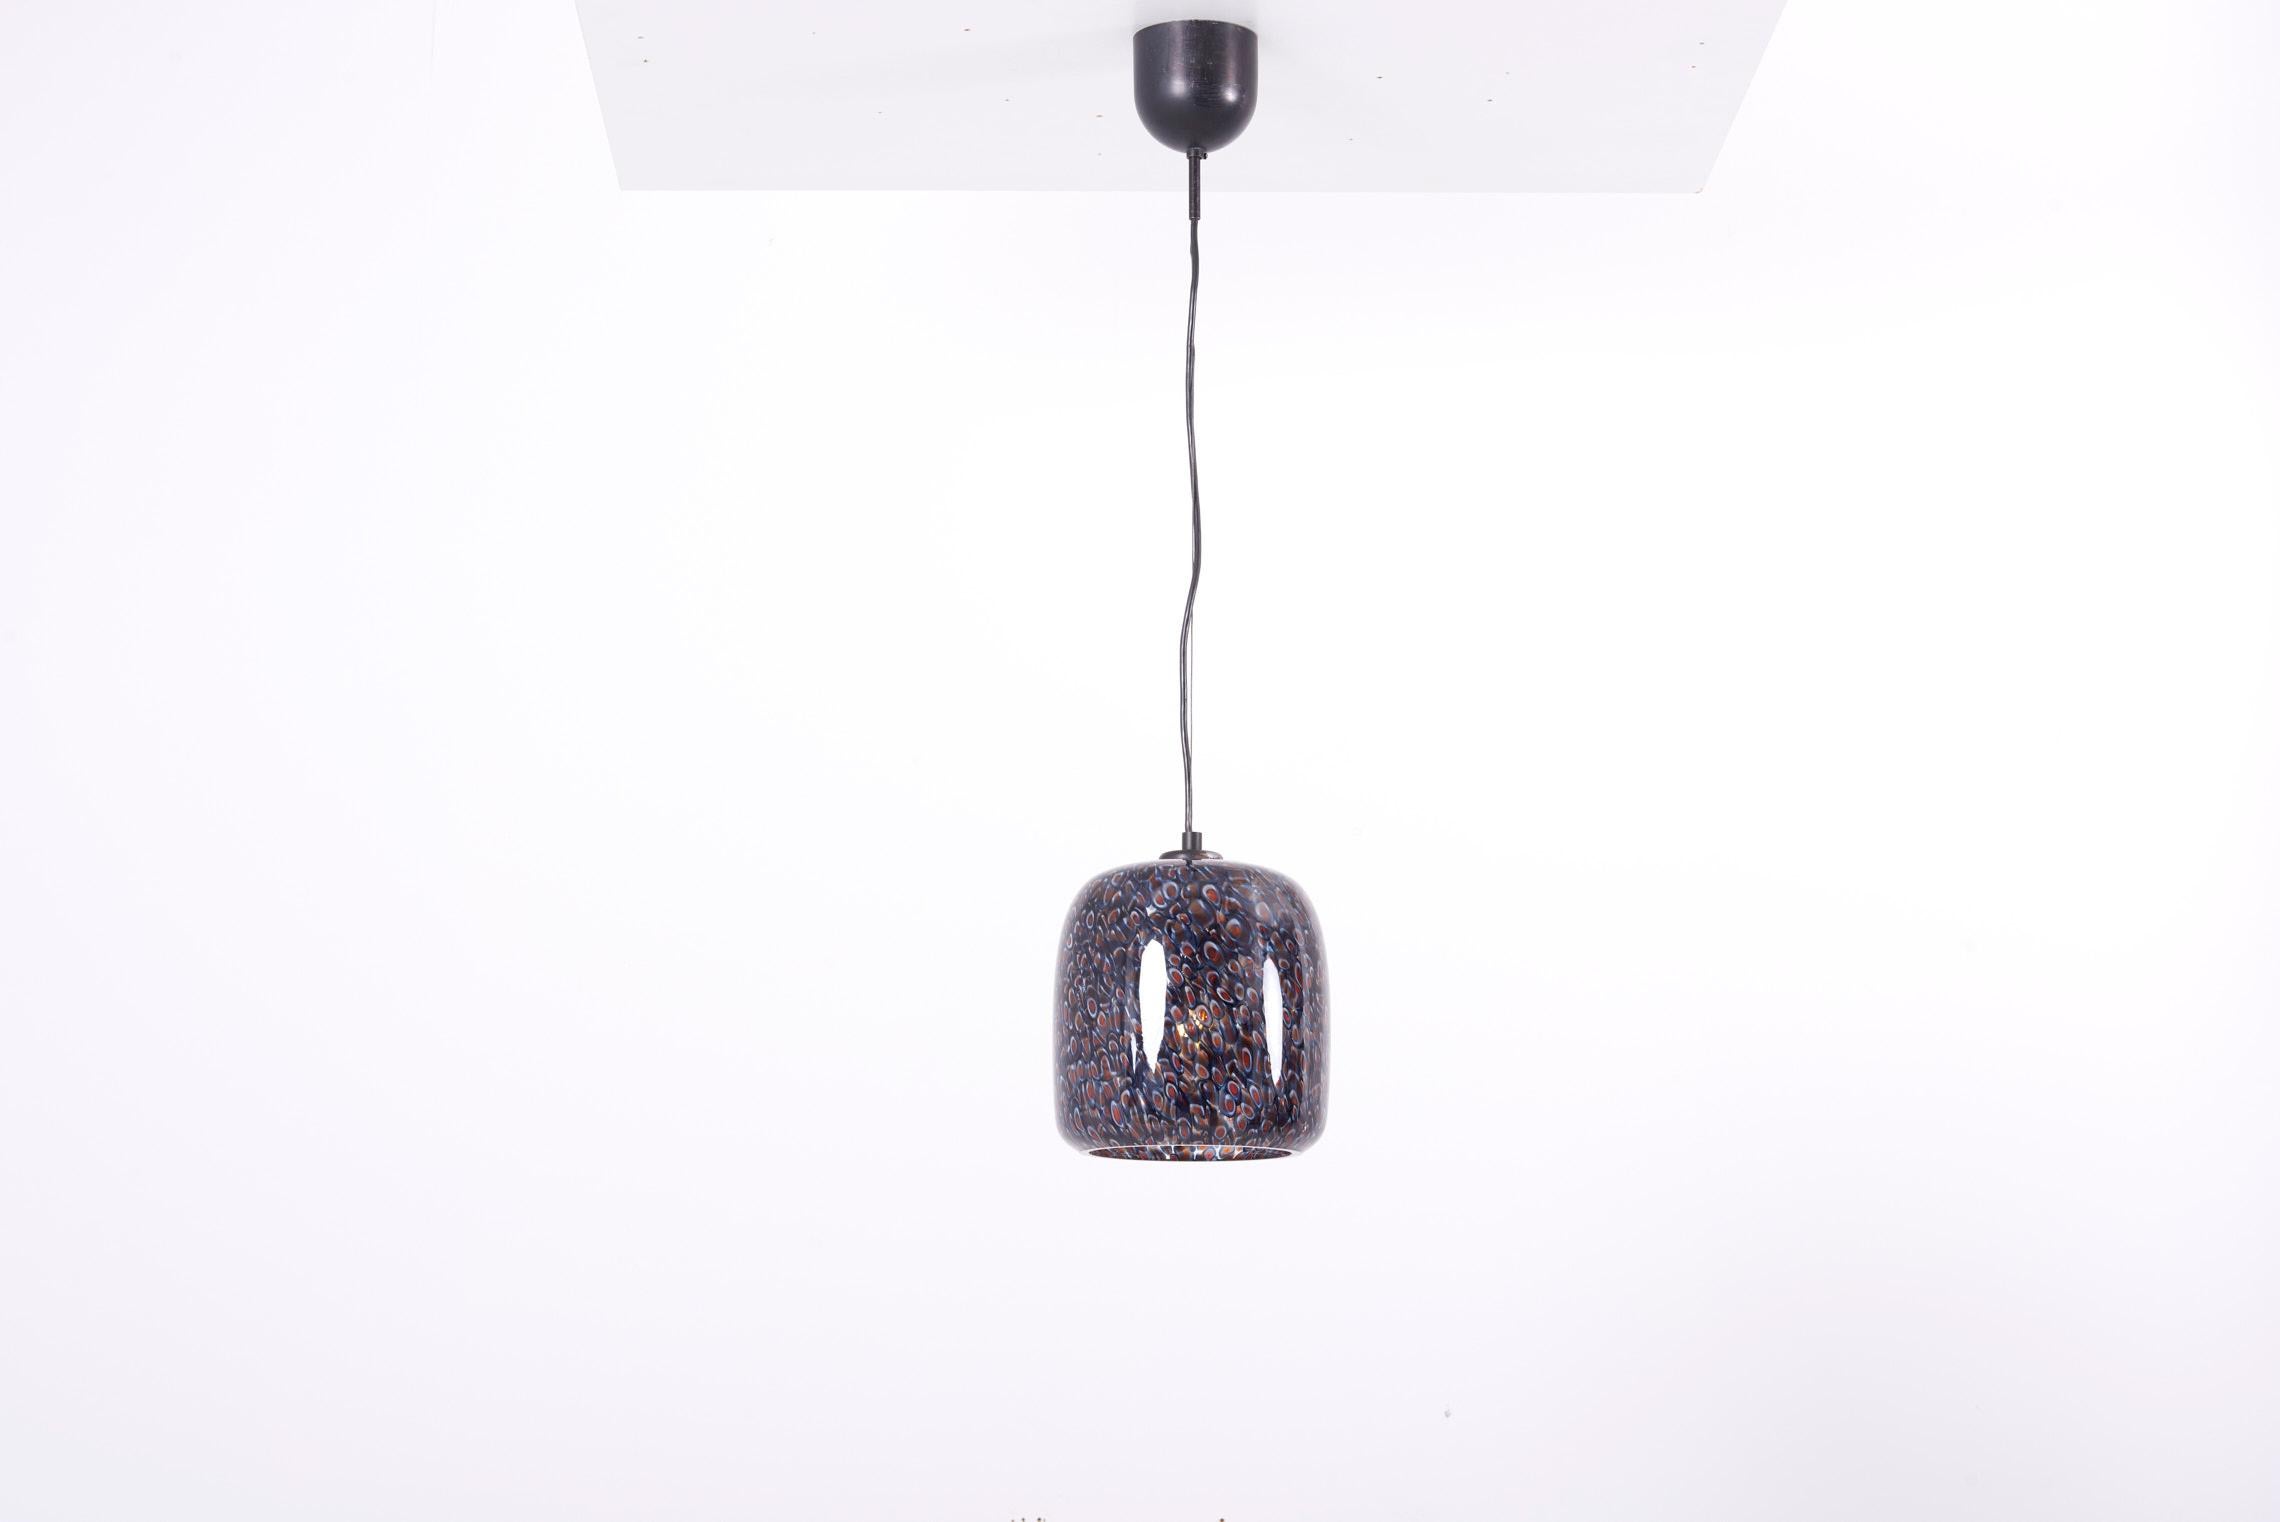 Beautiful Murano glass pendant lamp by Italian designer Gae Aulenti for Murano Glass manufacturer Vistosi.

1 x E27 socket.

Please note: Lamp should be fitted professionally in accordance to local requirements.